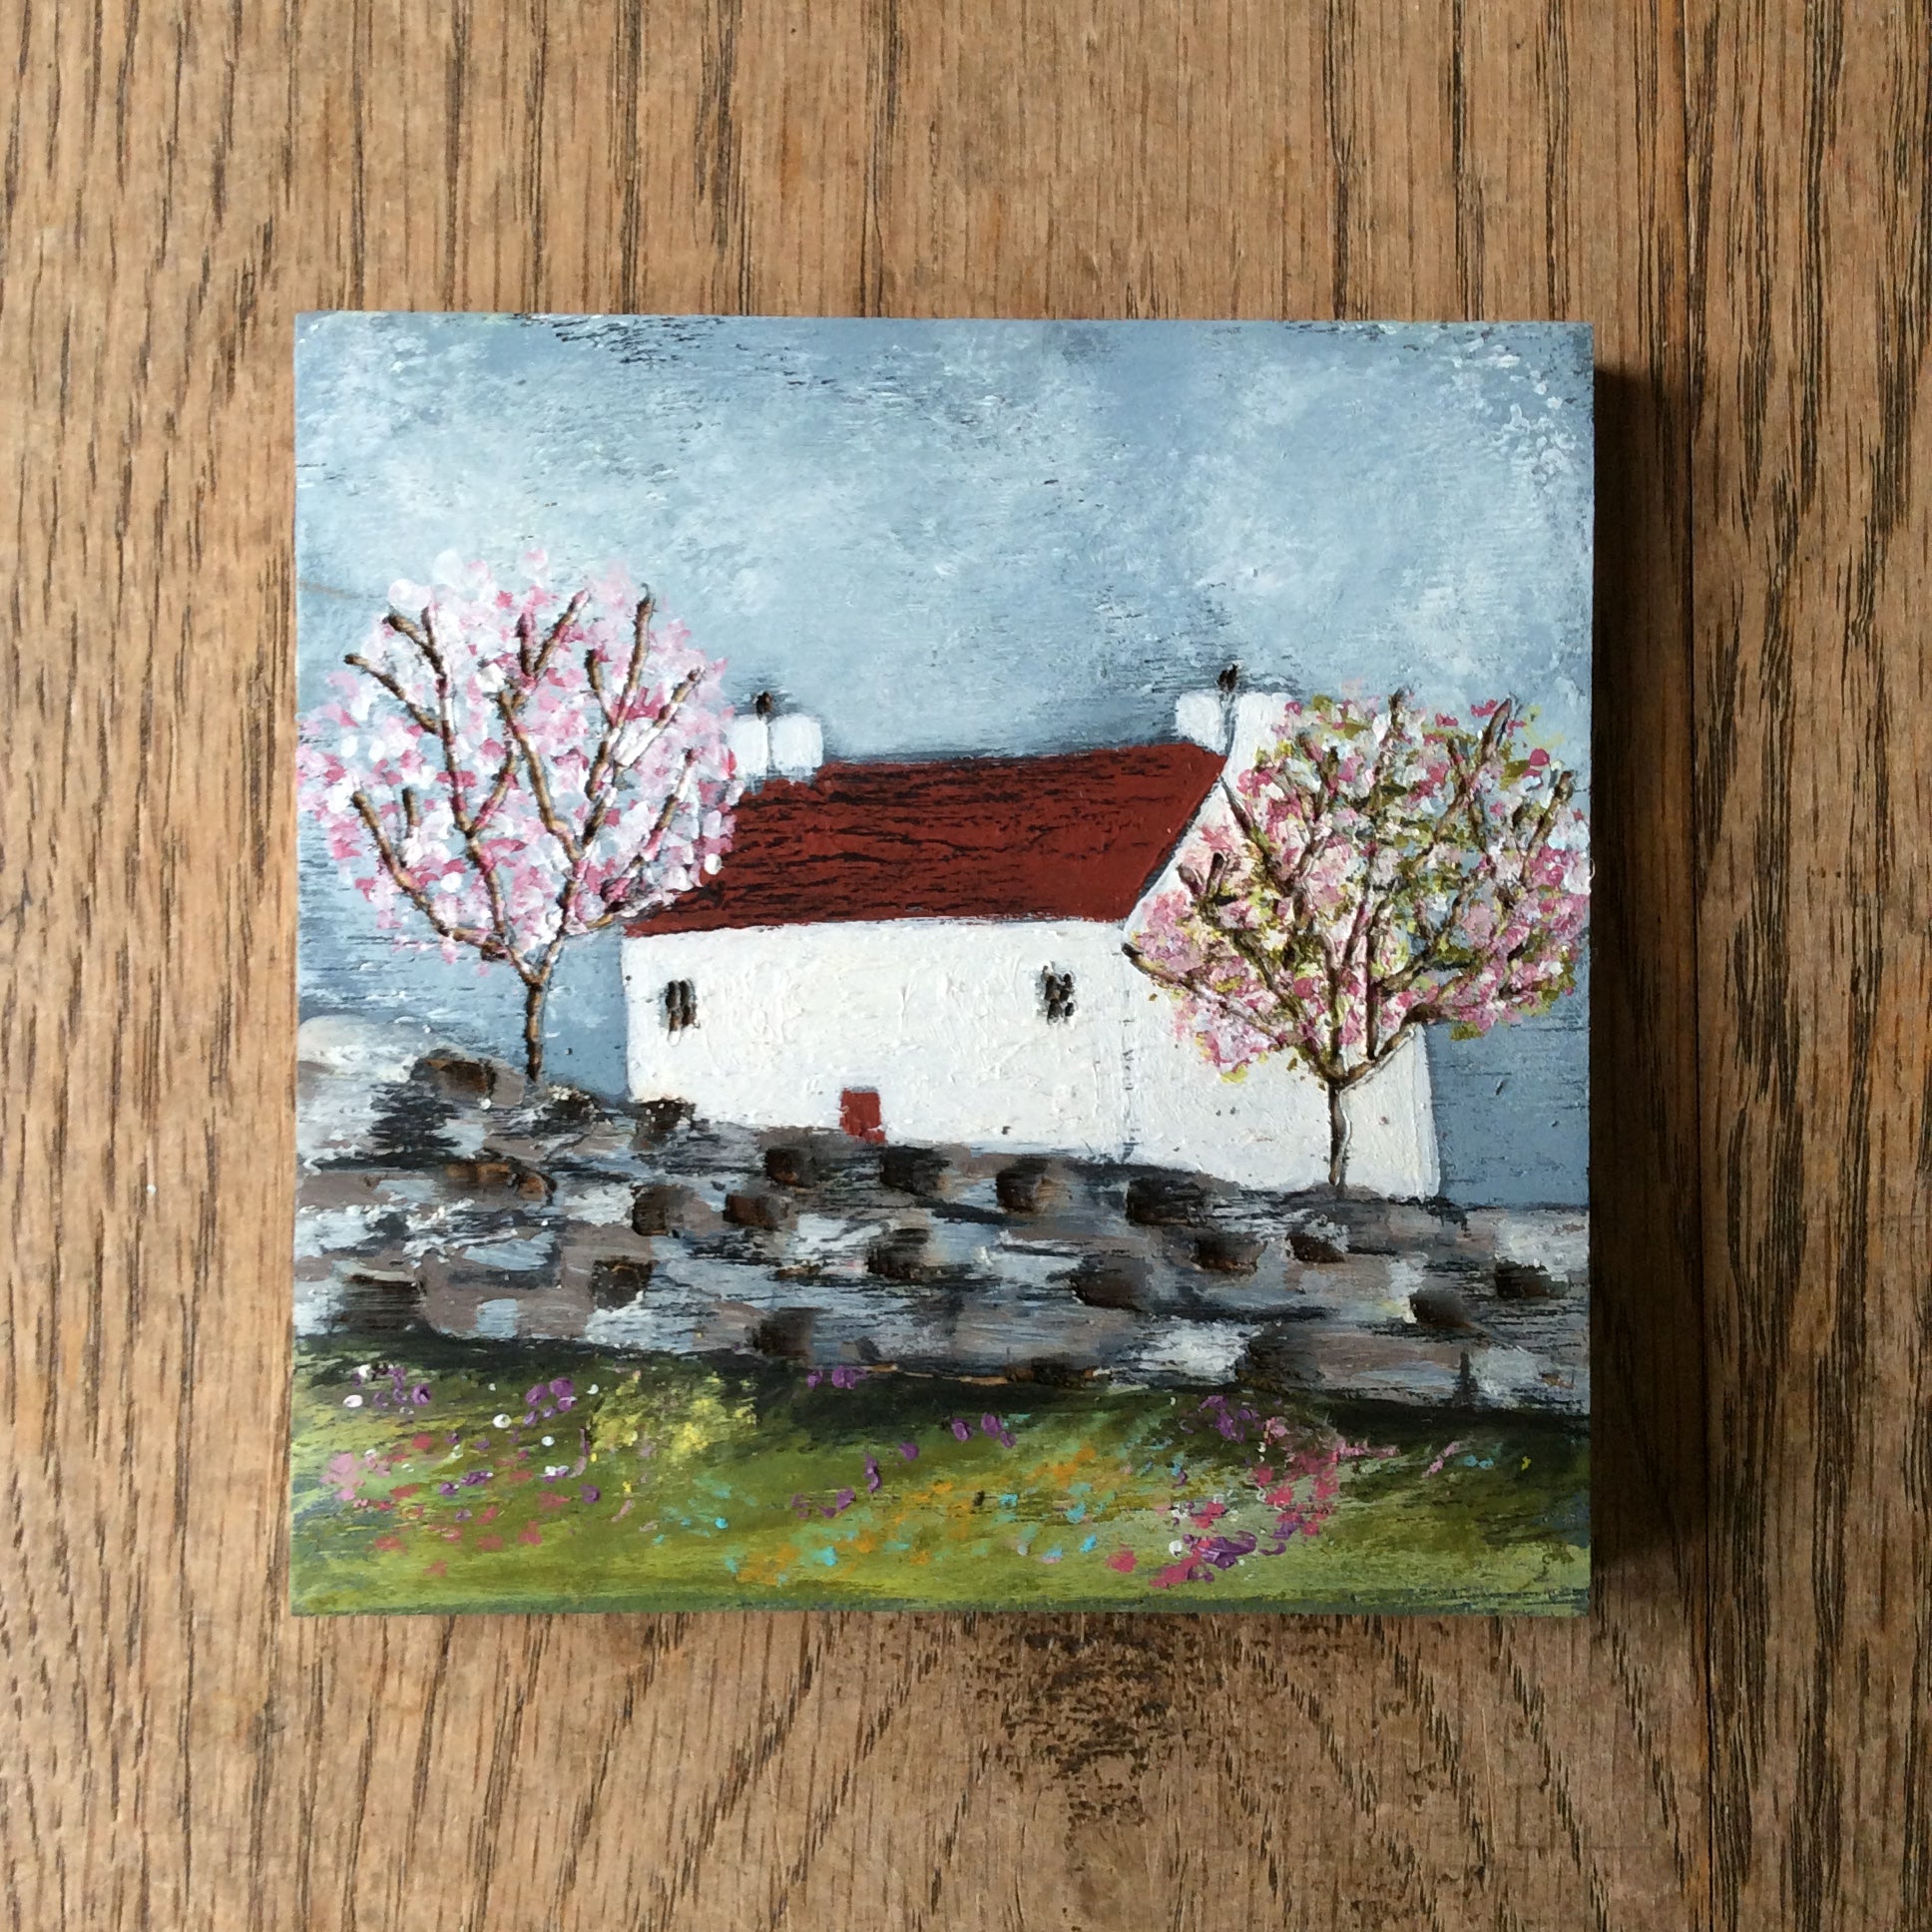 Mixed Media Art on wood By Louise O'Hara - "The Cottage nestled between the cherry blossoms”